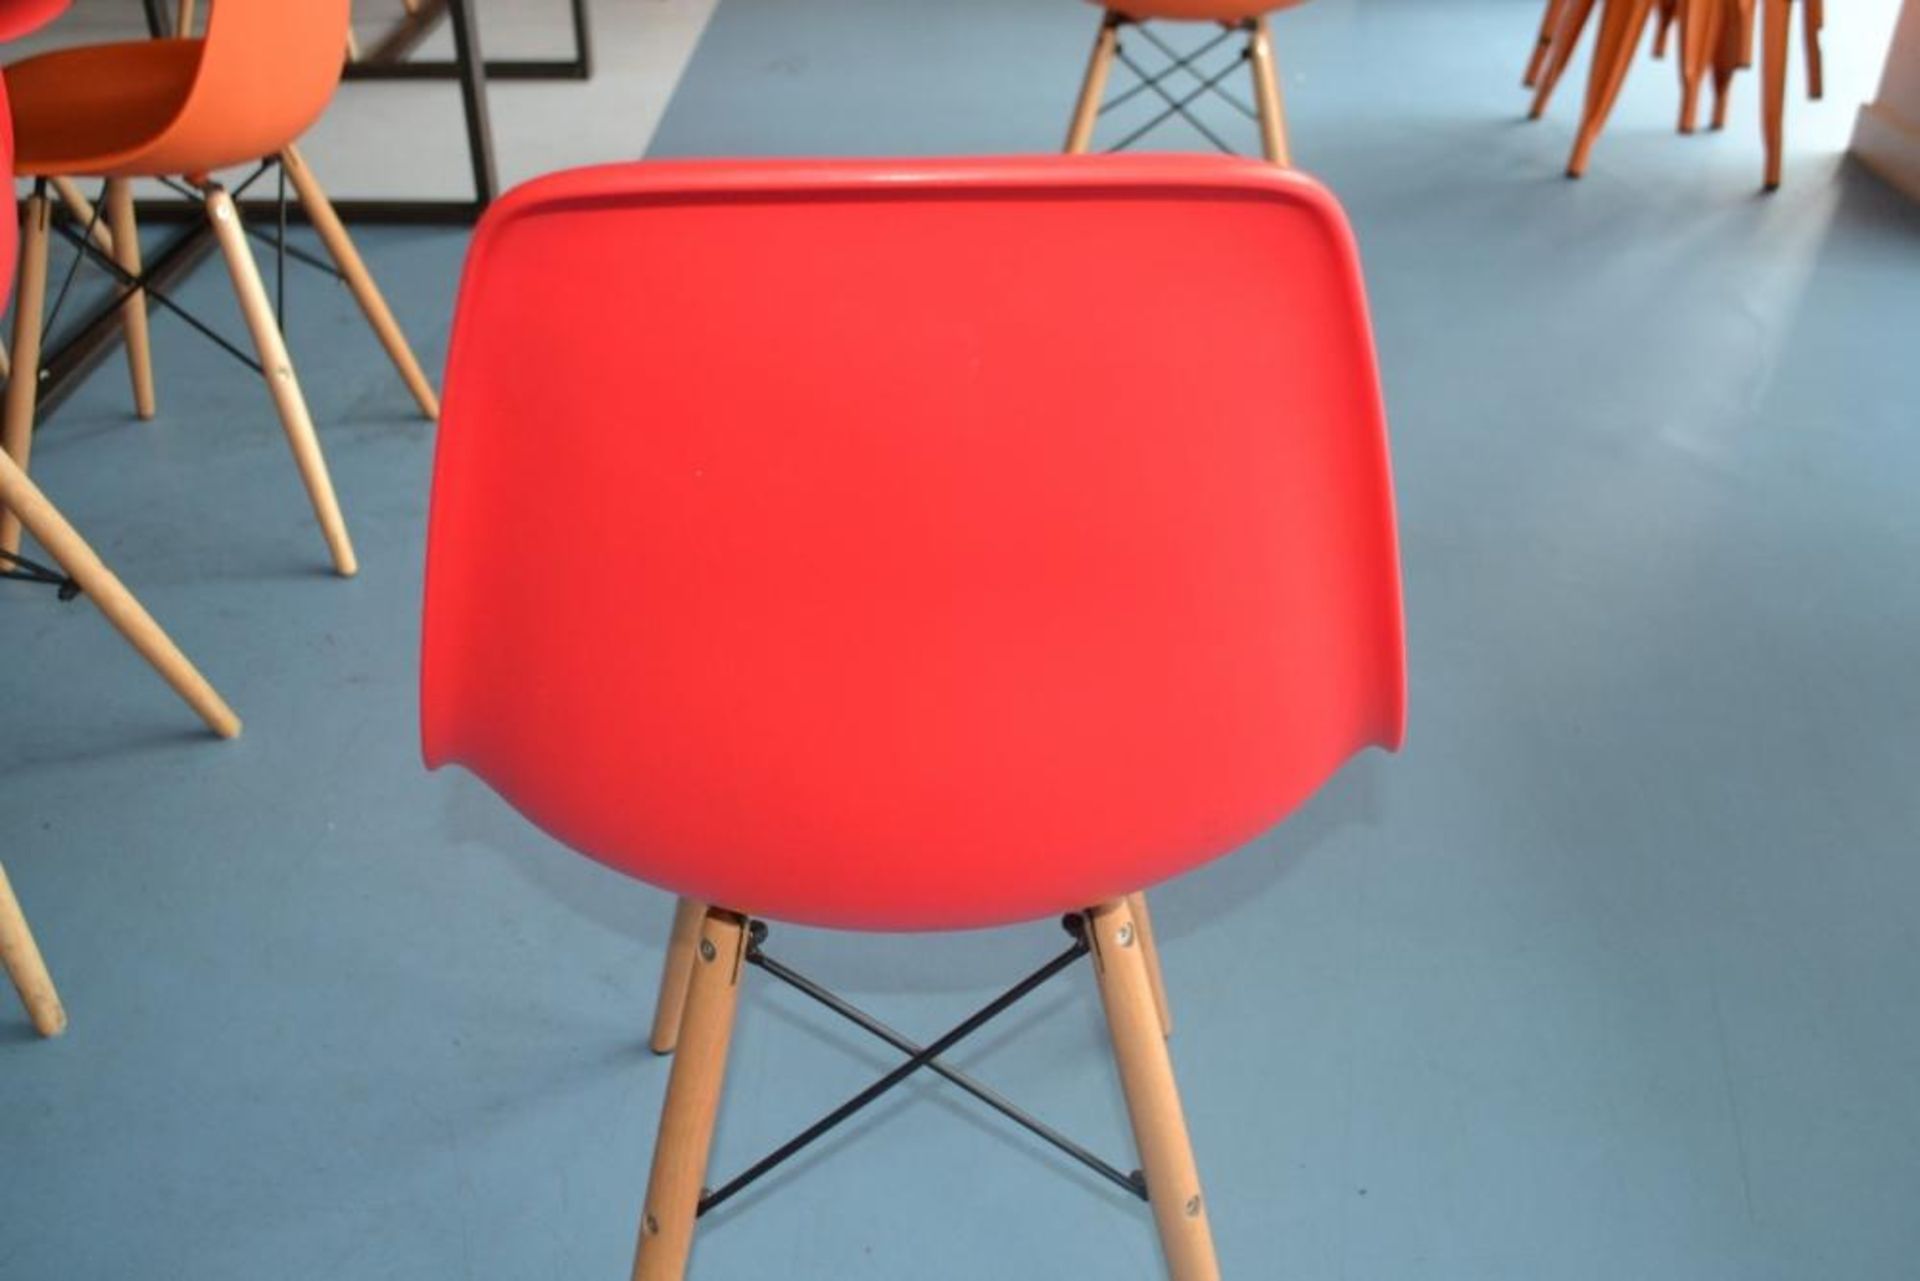 12 x Children's Red and Orange Charles and Ray Eames Style Shell Chairs - CL425 - Location: Altrinch - Image 9 of 9